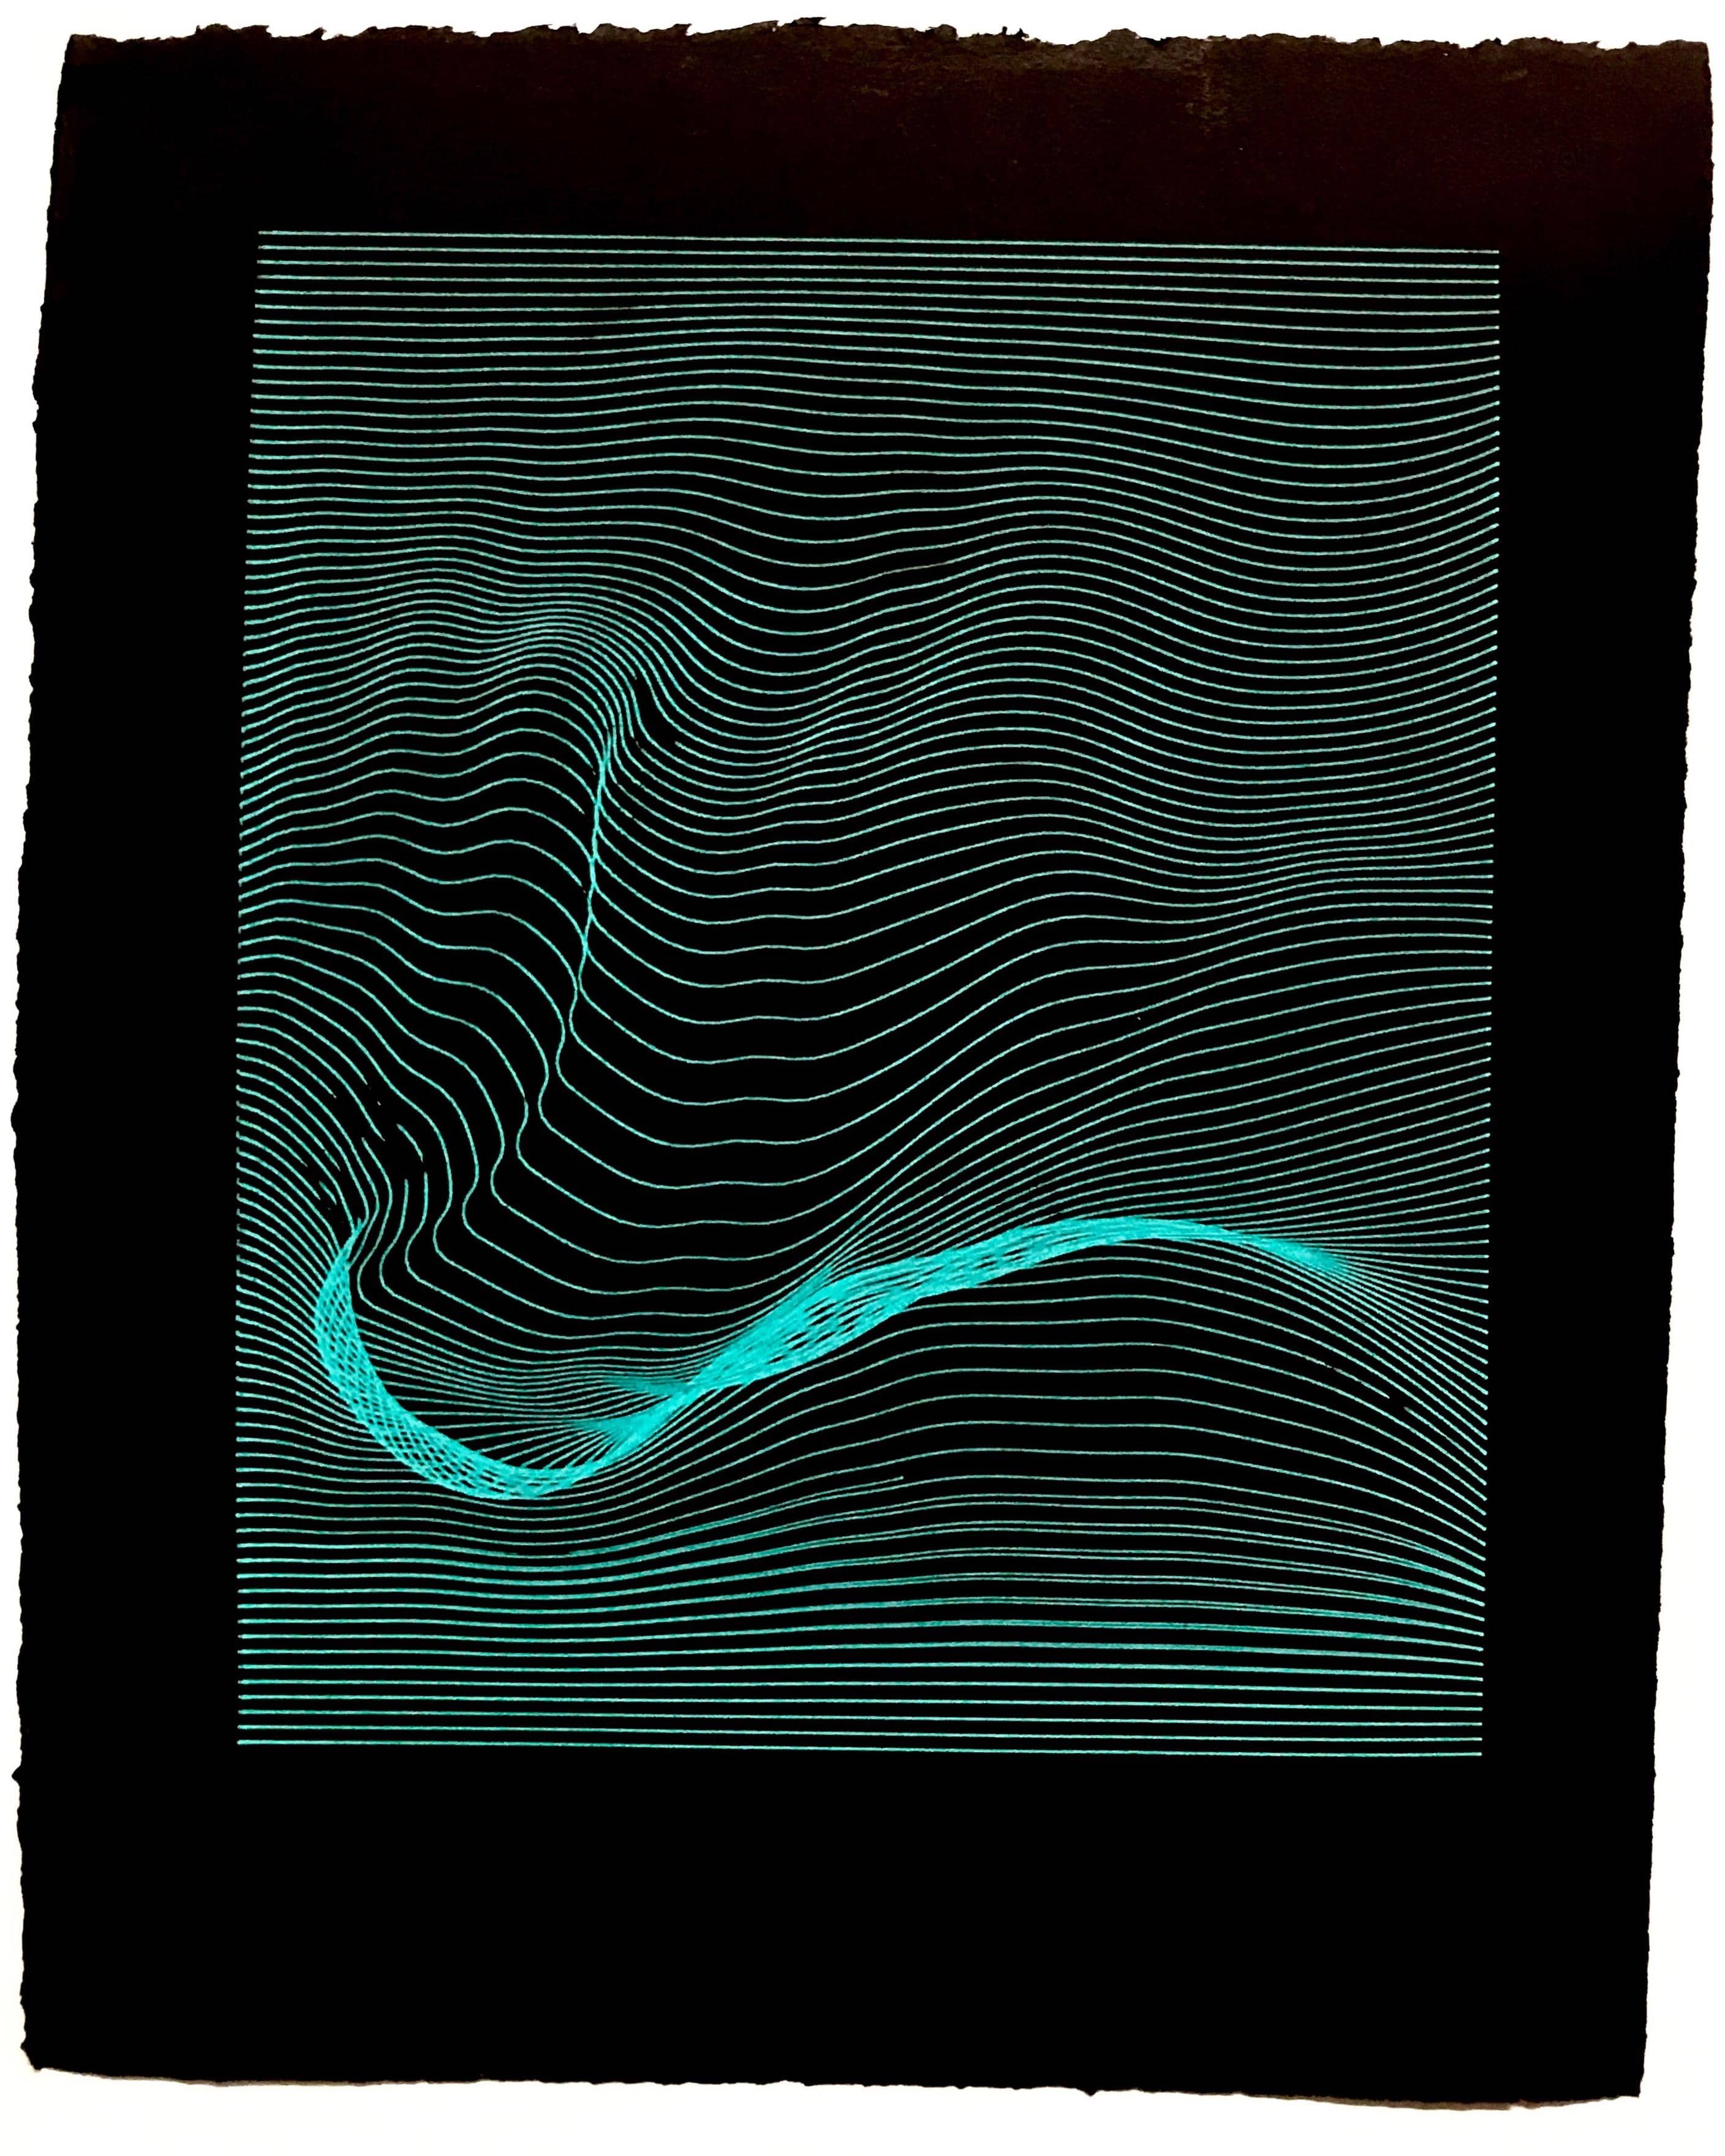 A drawing of a sine wave lerp plotted on black paper with an AxiDraw V3 and a turquoise gel pen.